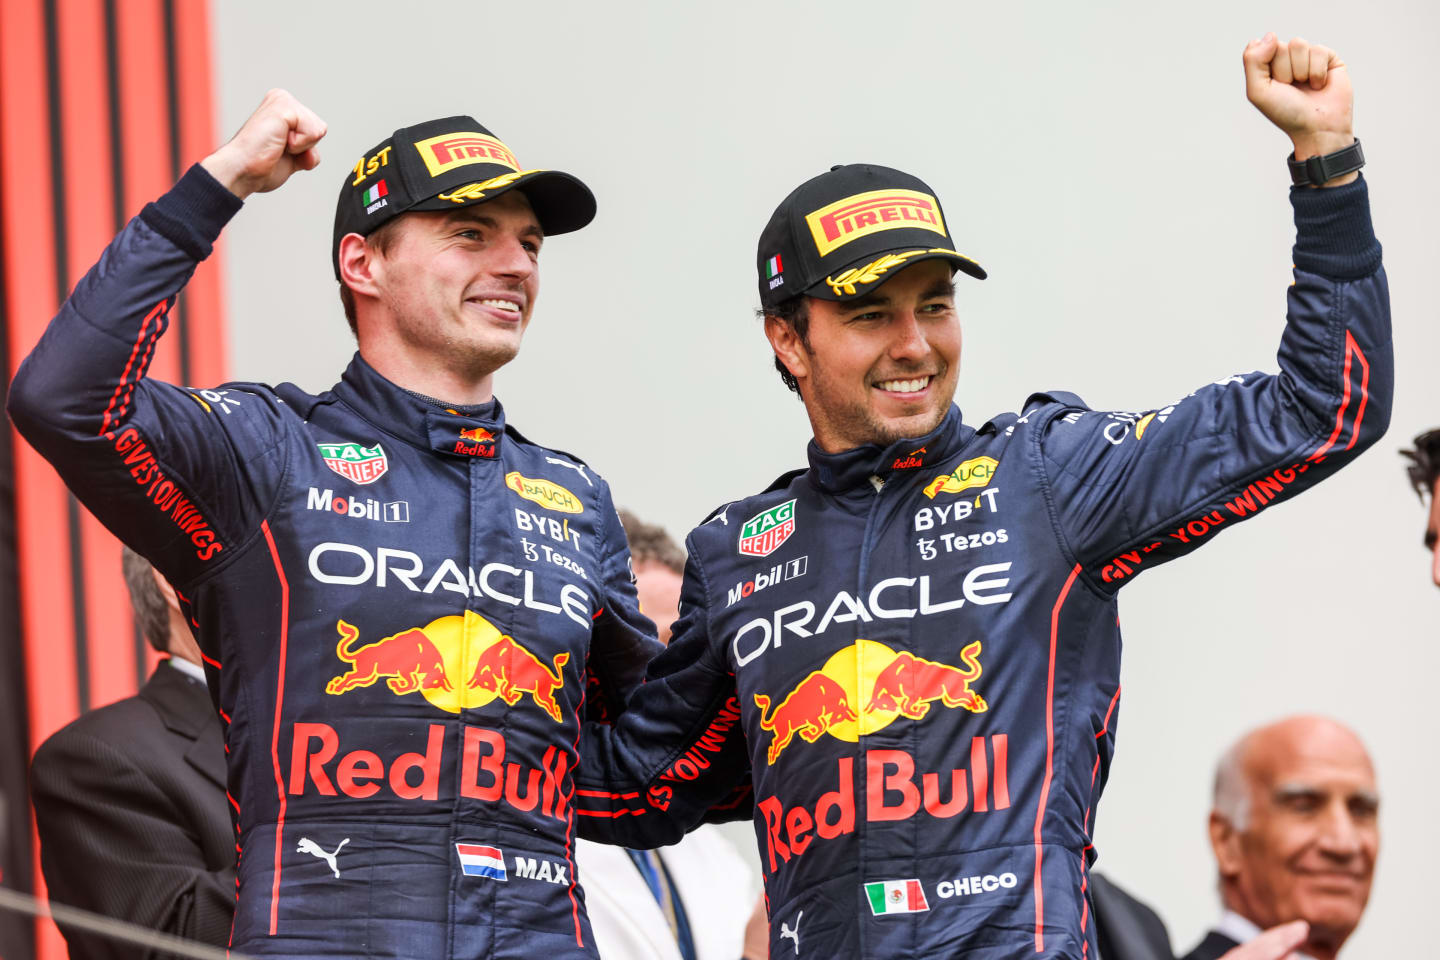 IMOLA, ITALY - APRIL 24: Max Verstappen of Red Bull Racing and The Netherlands  celebrates with Sergio Perez of Mexico and Red Bull Racing after finishing in first and second position during the F1 Grand Prix of Emilia Romagna at Autodromo Enzo e Dino Ferrari on April 24, 2022 in Imola, Italy. (Photo by Peter Fox/Getty Images)